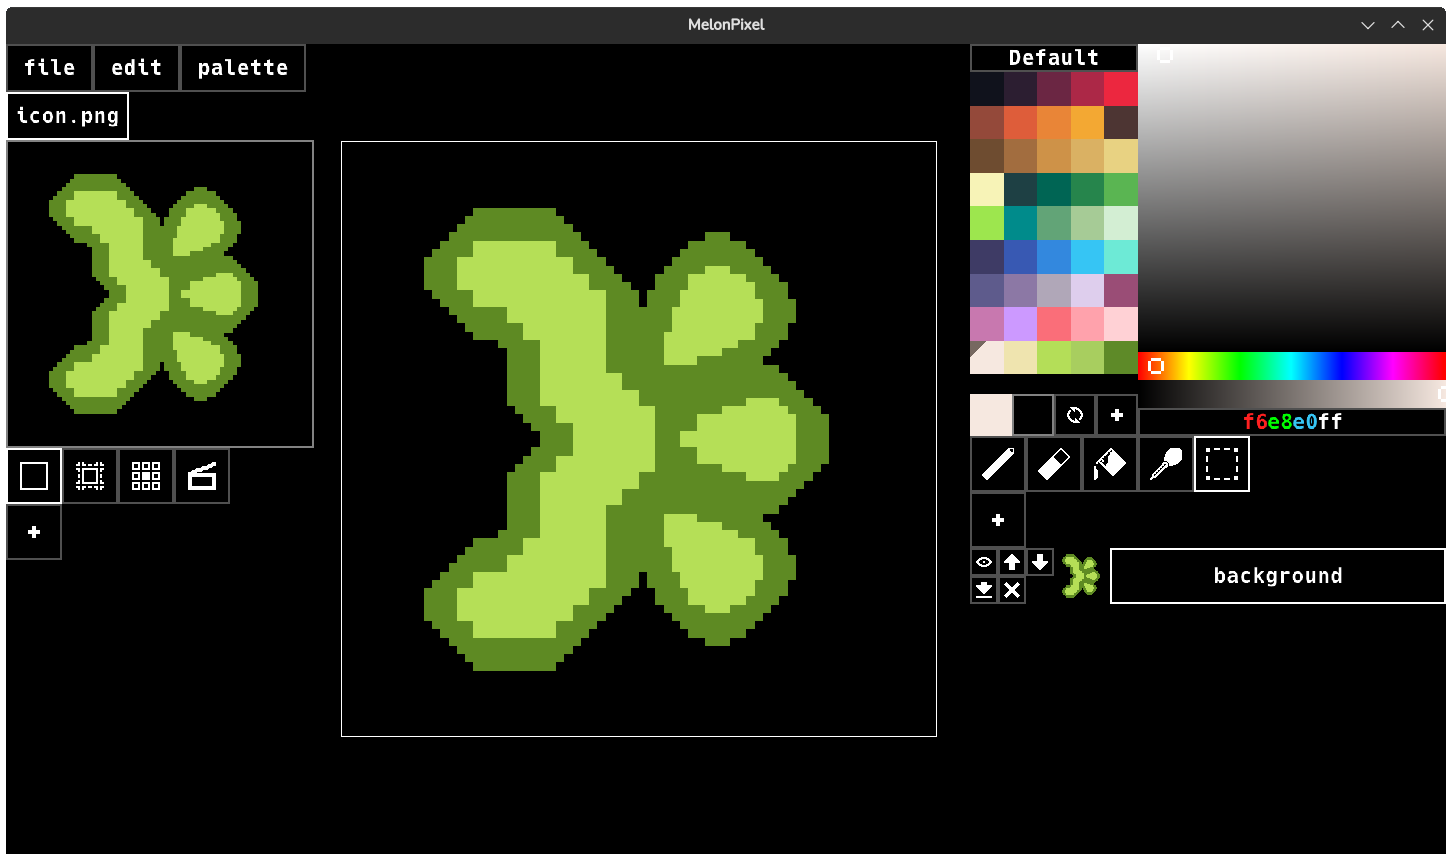 MelonPixel editing its own icon